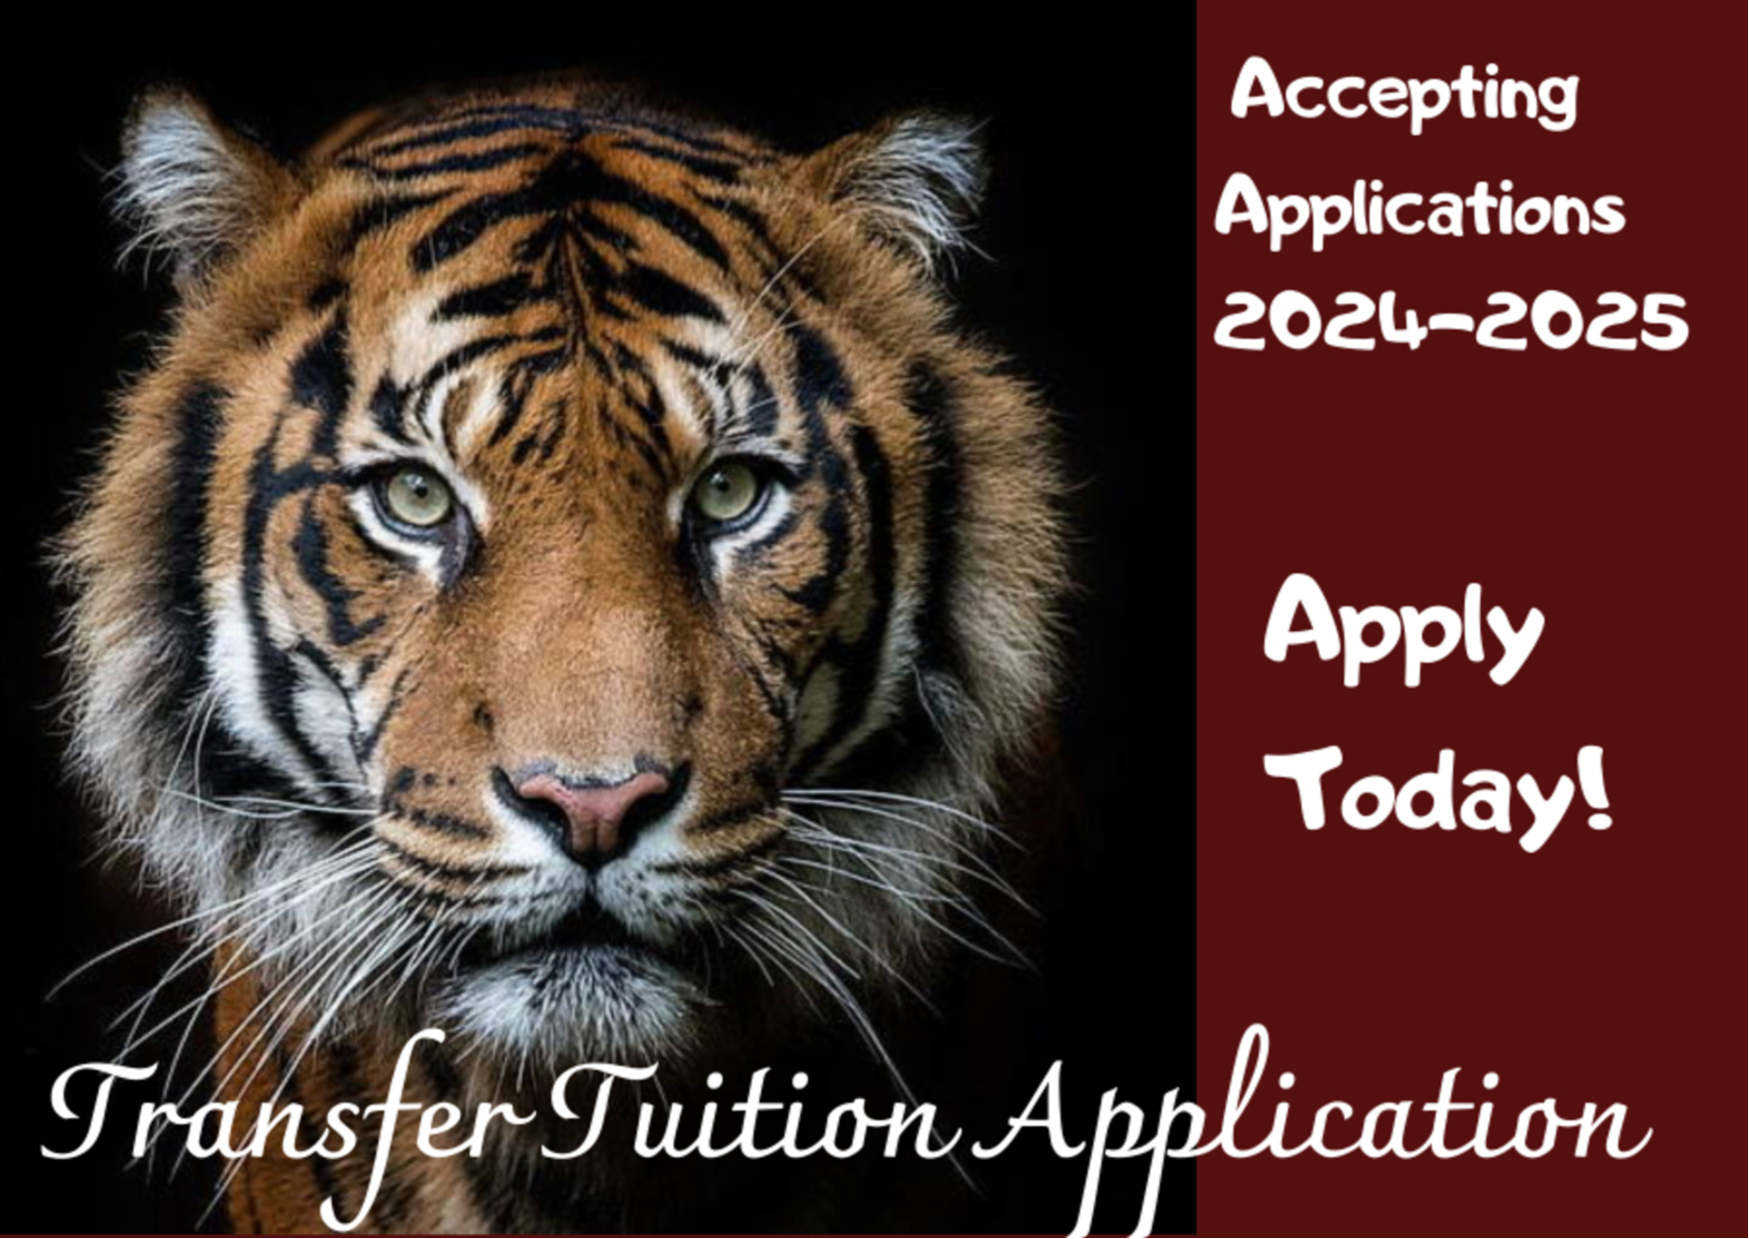 Trasnfer tuition application